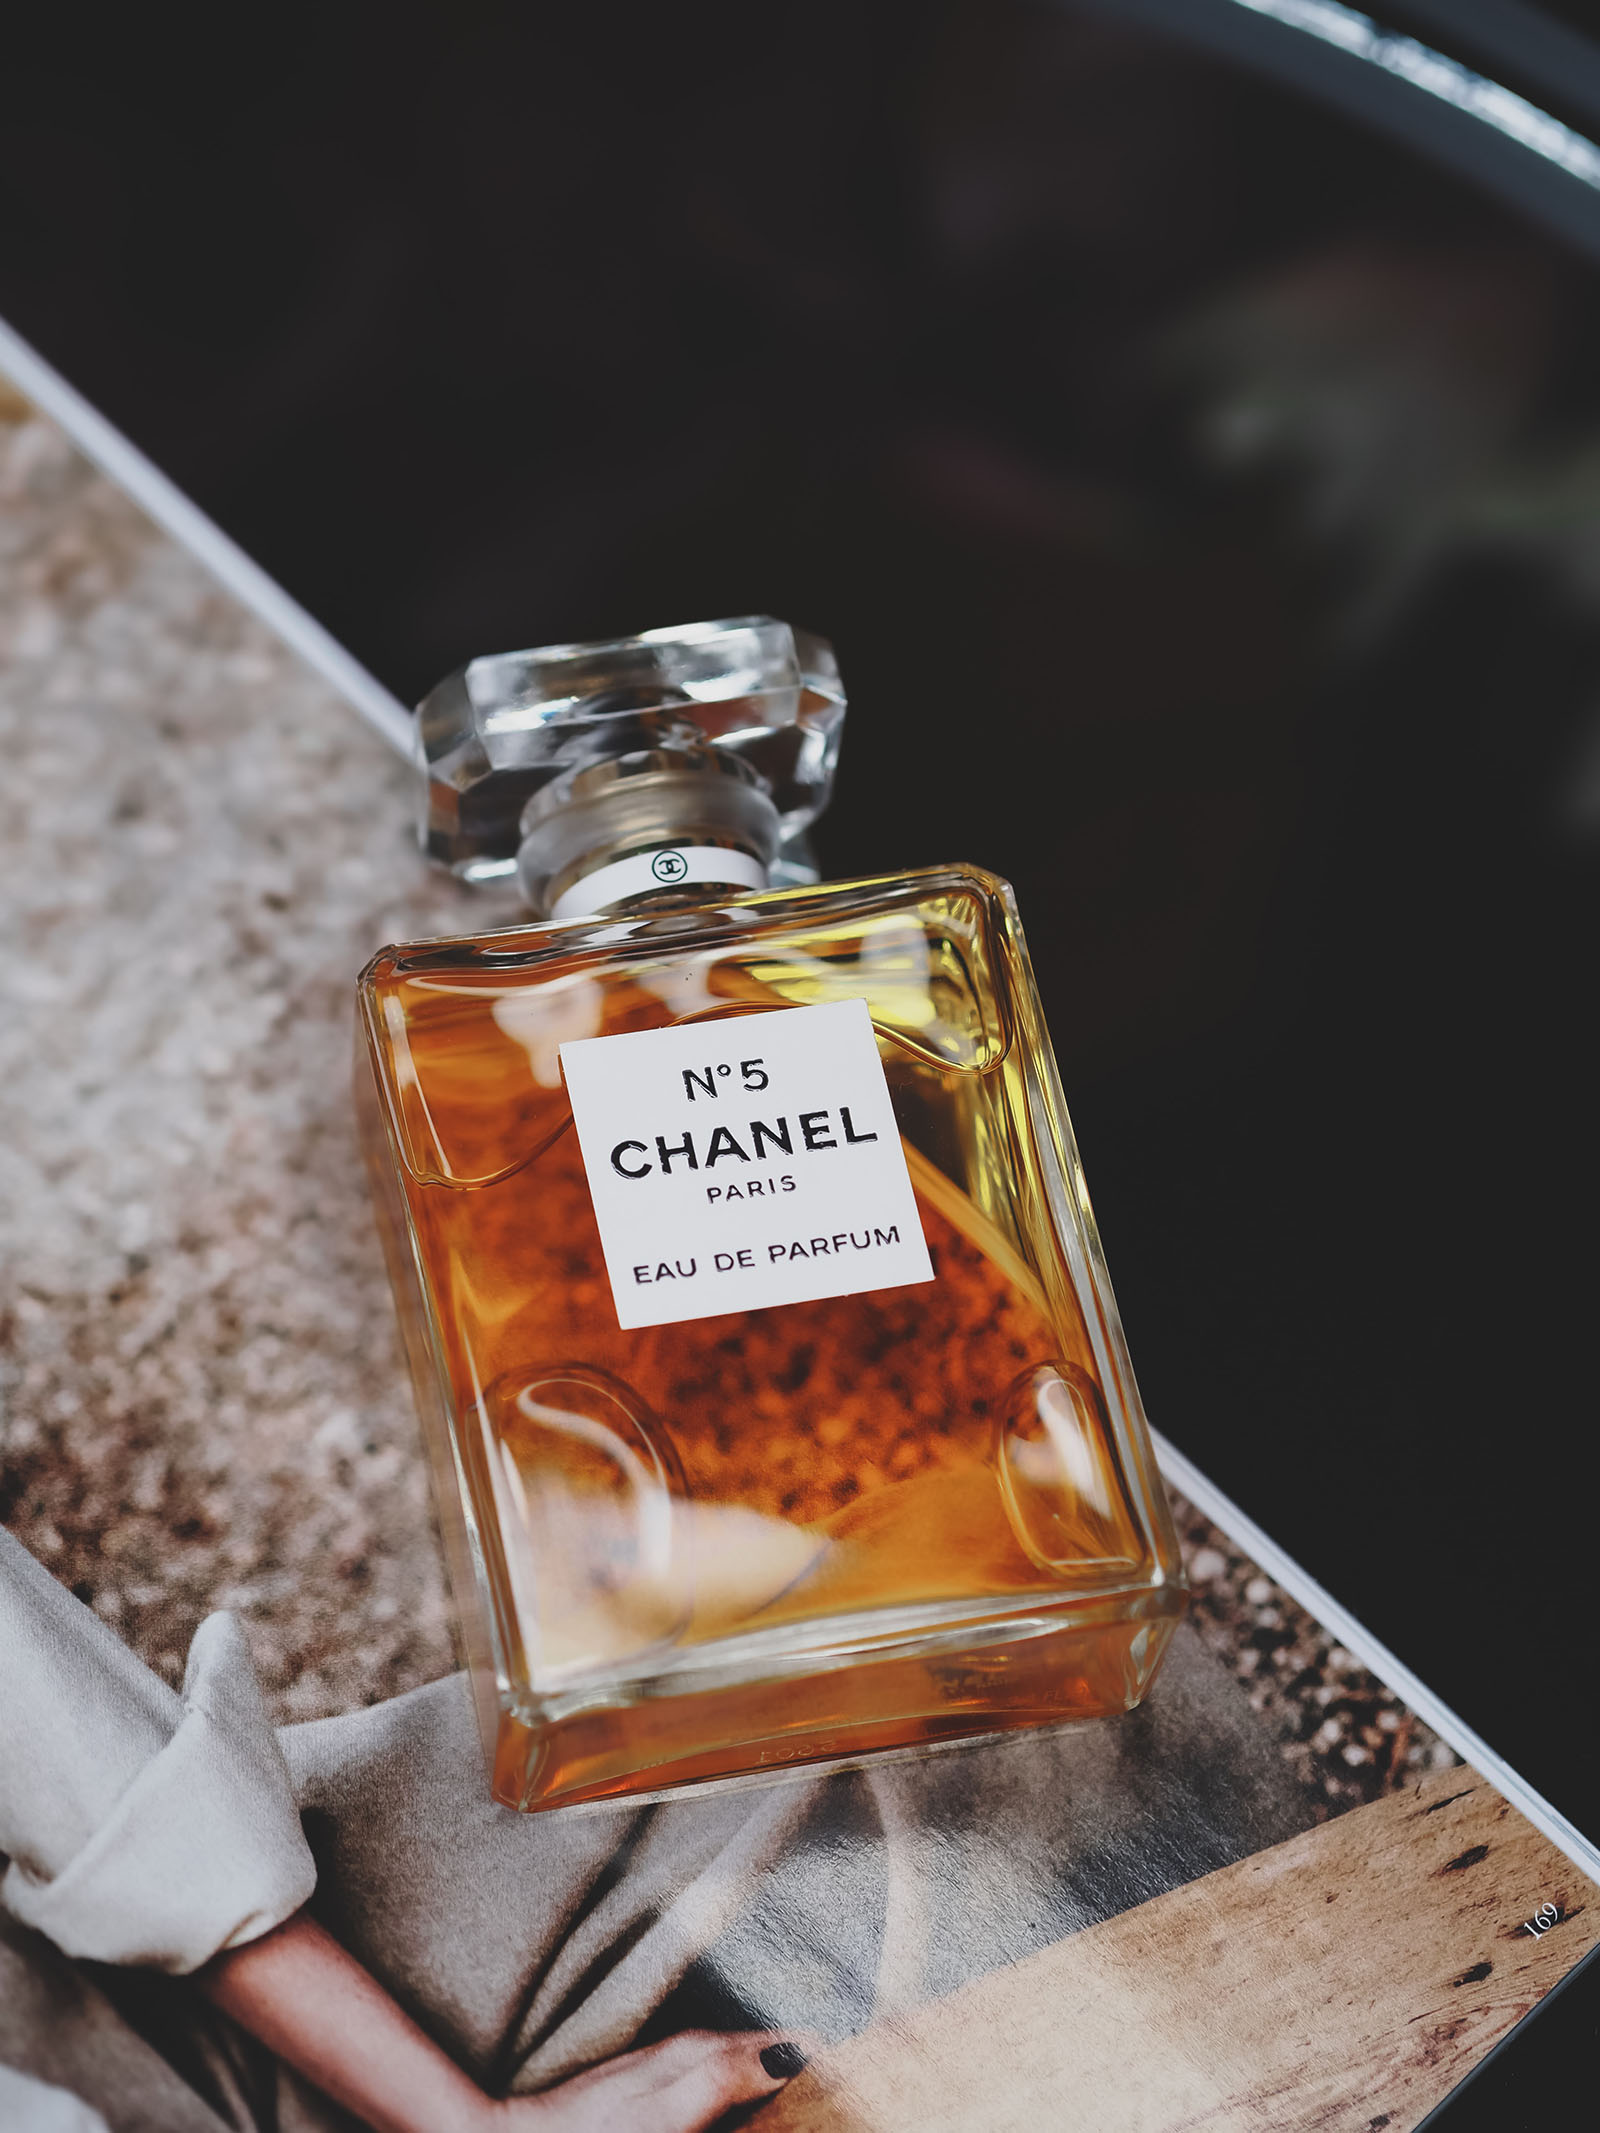 Chanel No. 5 is a signature scent for Taurus